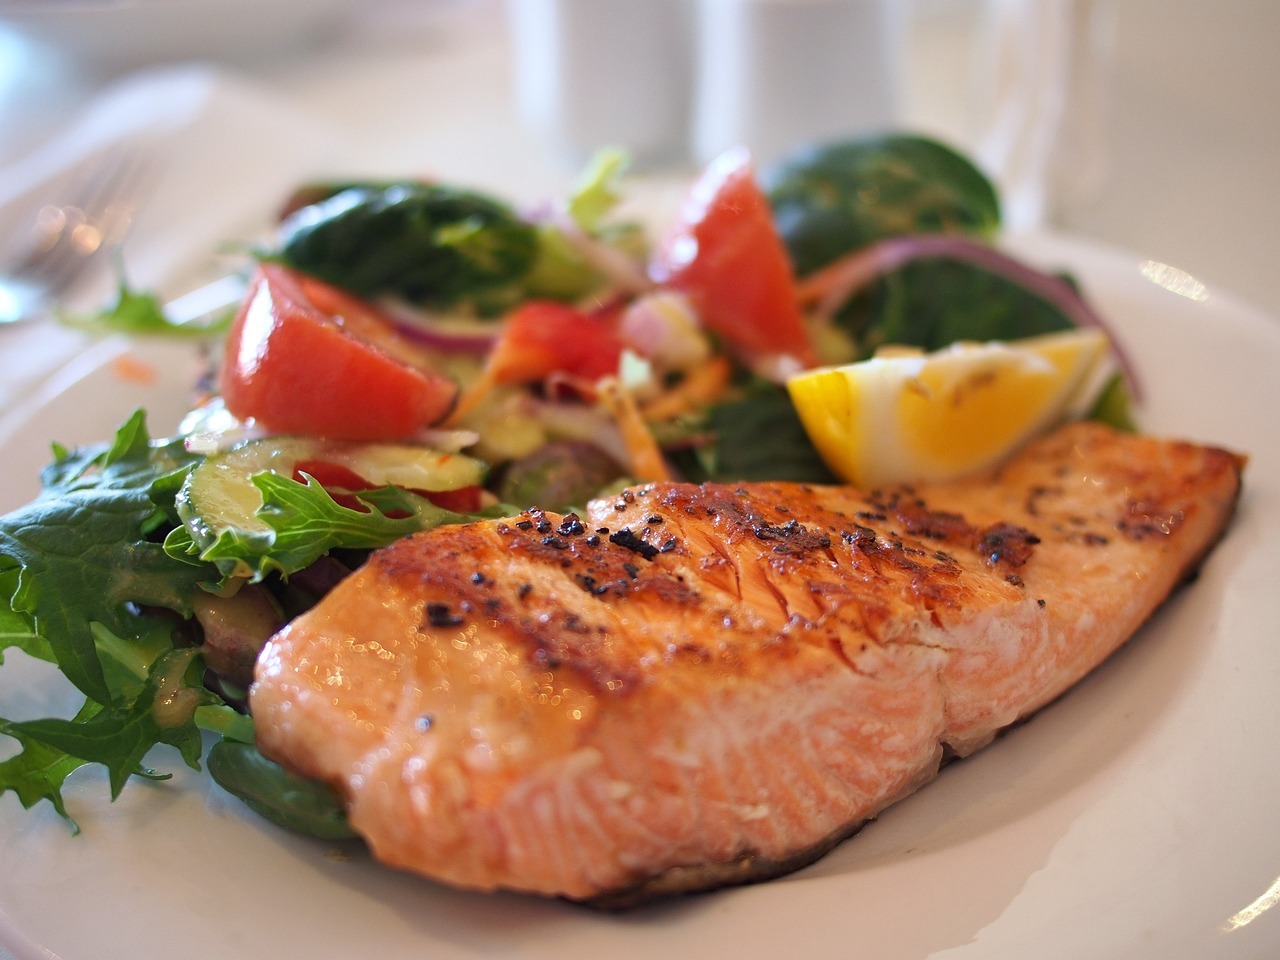 Plate of grilled salmon with a side of greens